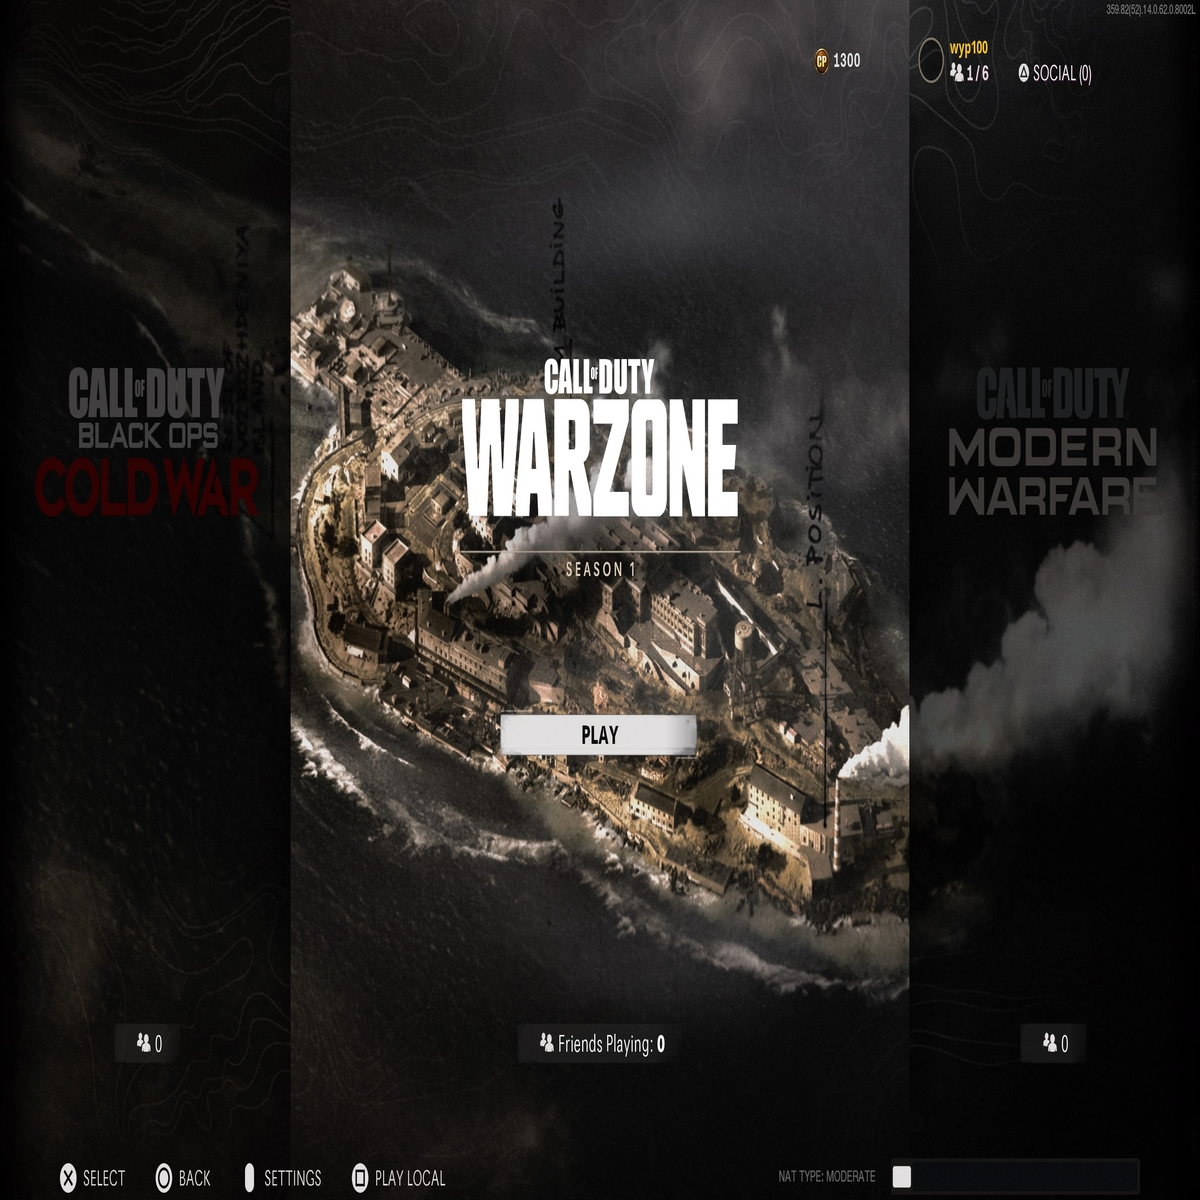 Introducing a game-changing FREE-TO-PLAY experience - Call of Duty®: Warzone